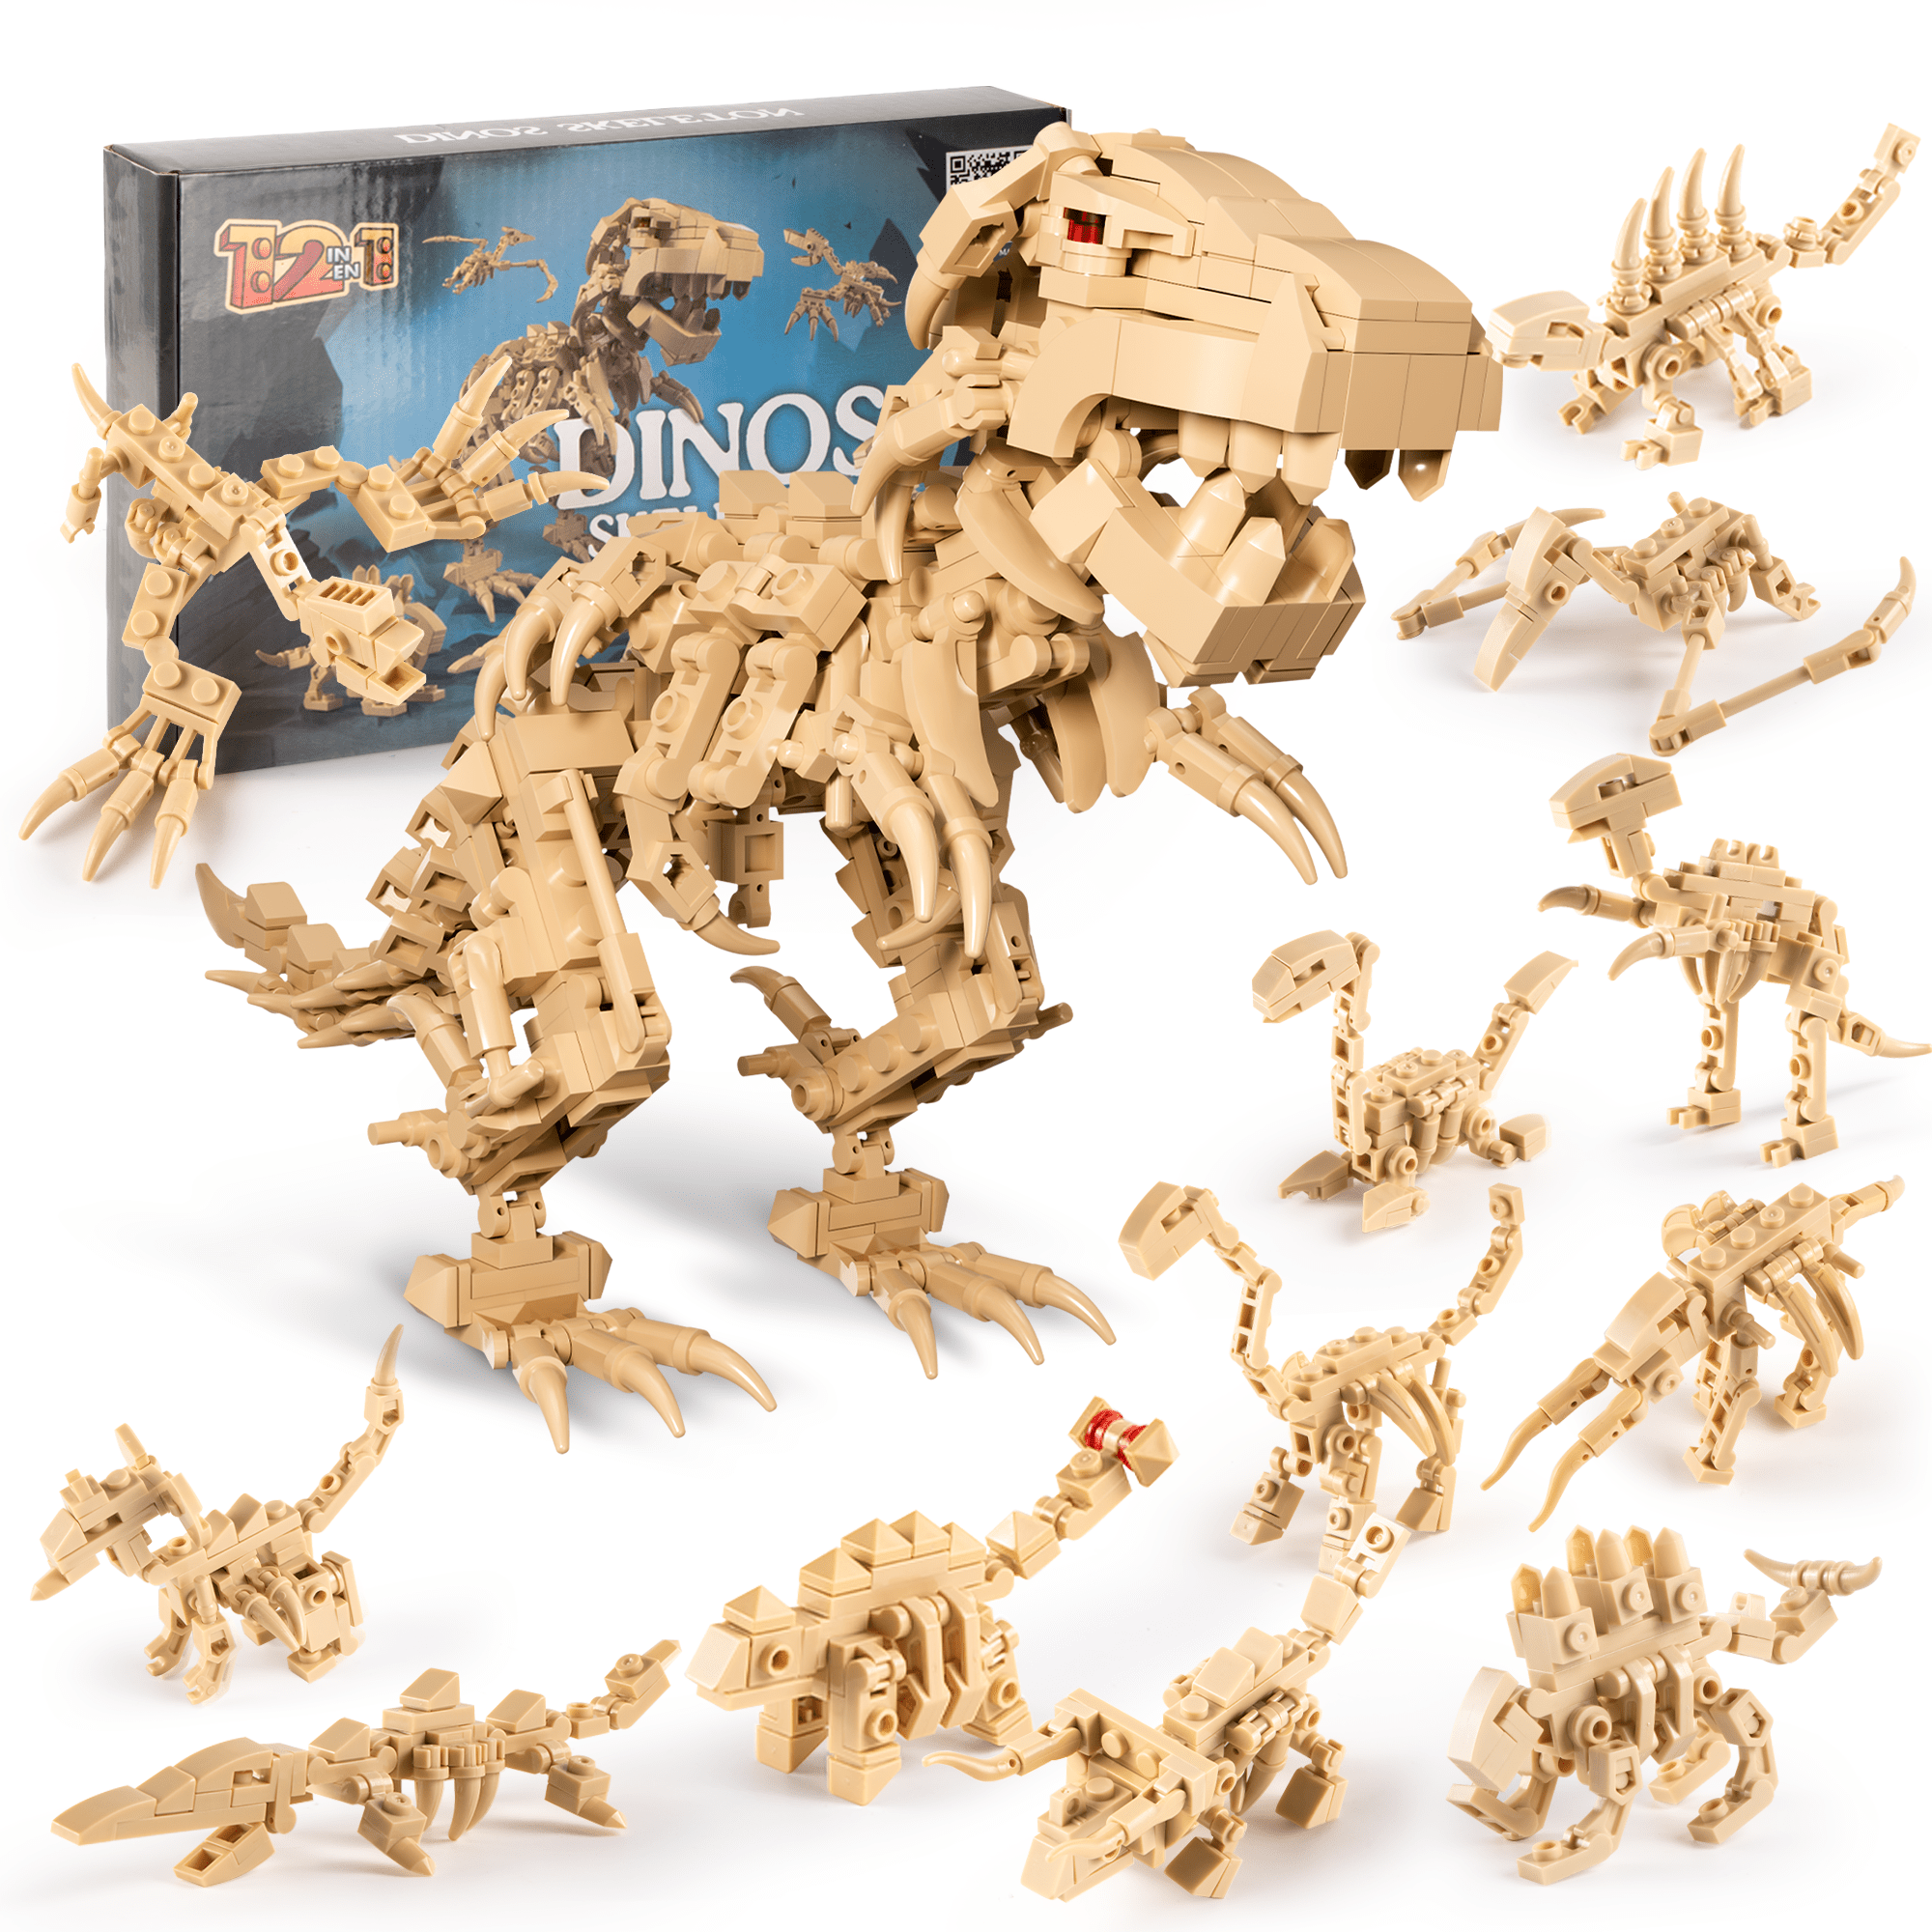 UNEEDE 12-in-1 Dinosaur Building Blocks Toy from 6-10 Years for Boys, 518 Pieces Construction Toy, STEM Building Learning Toy, Building Kit, Educational Gift for Boys and Girls